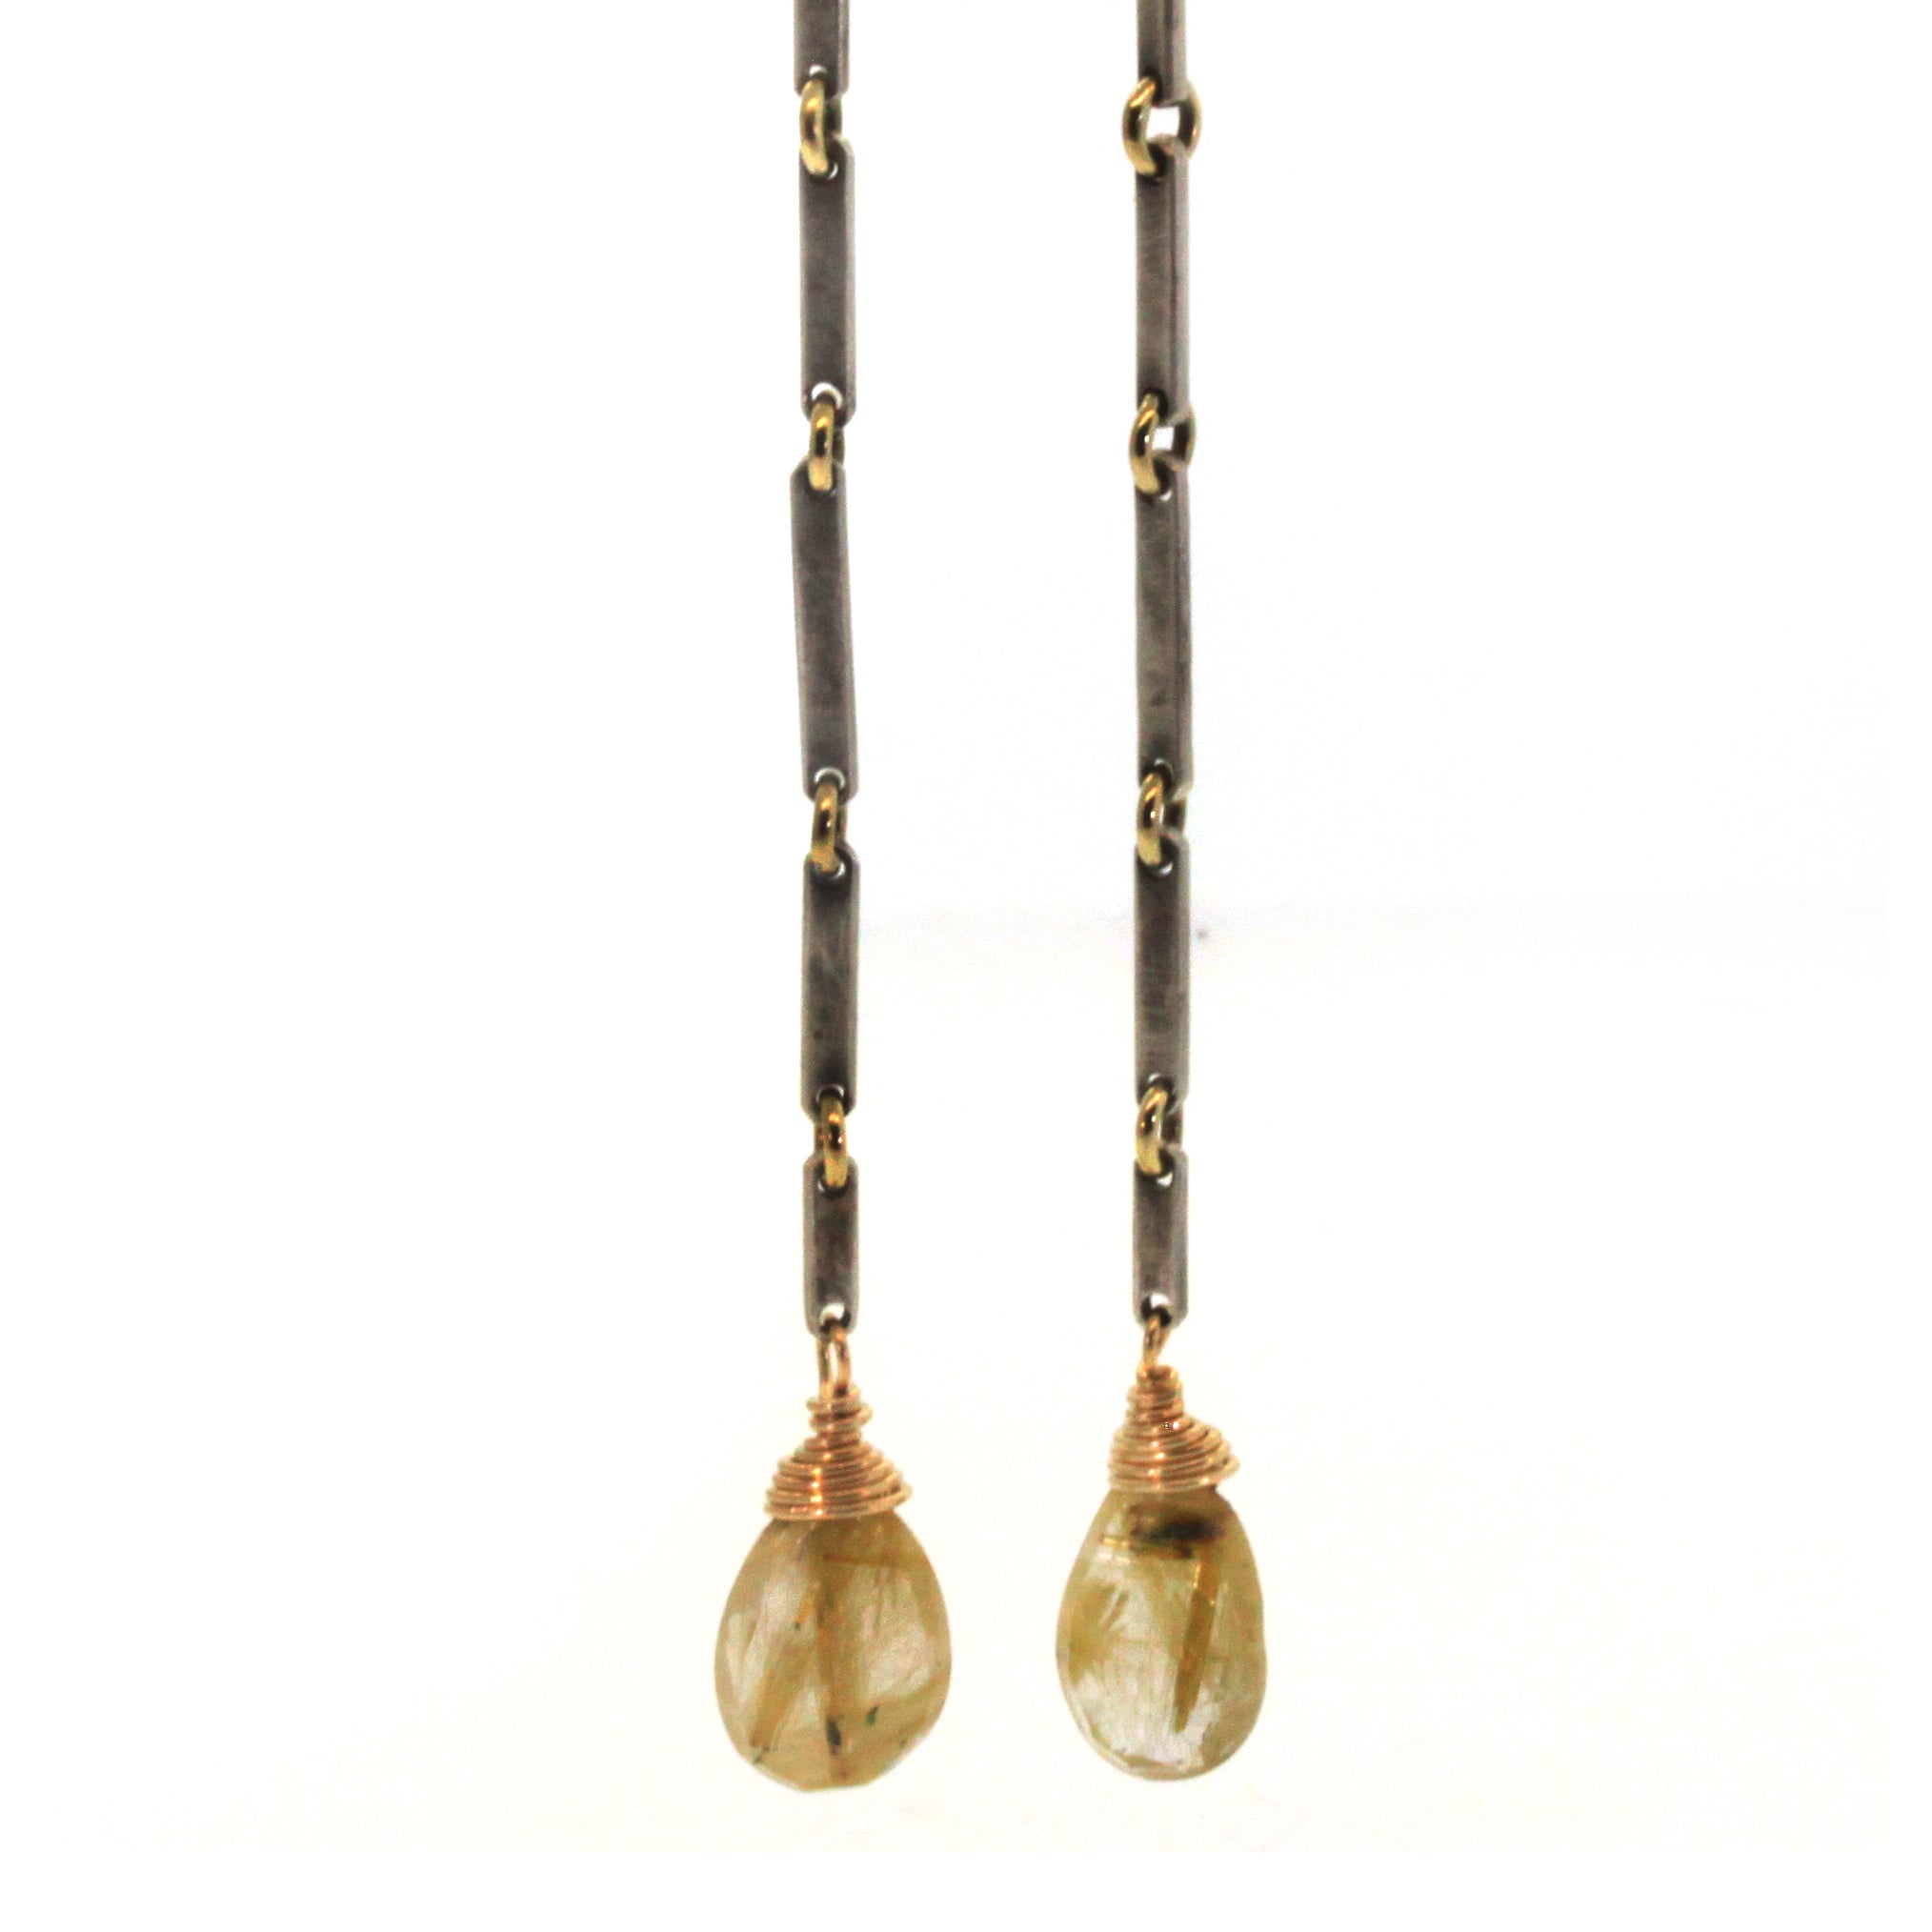 Rutliated Quartz Bar Earrings Handcrafted at Rebecca Lankford Designs in the Houston Heights.